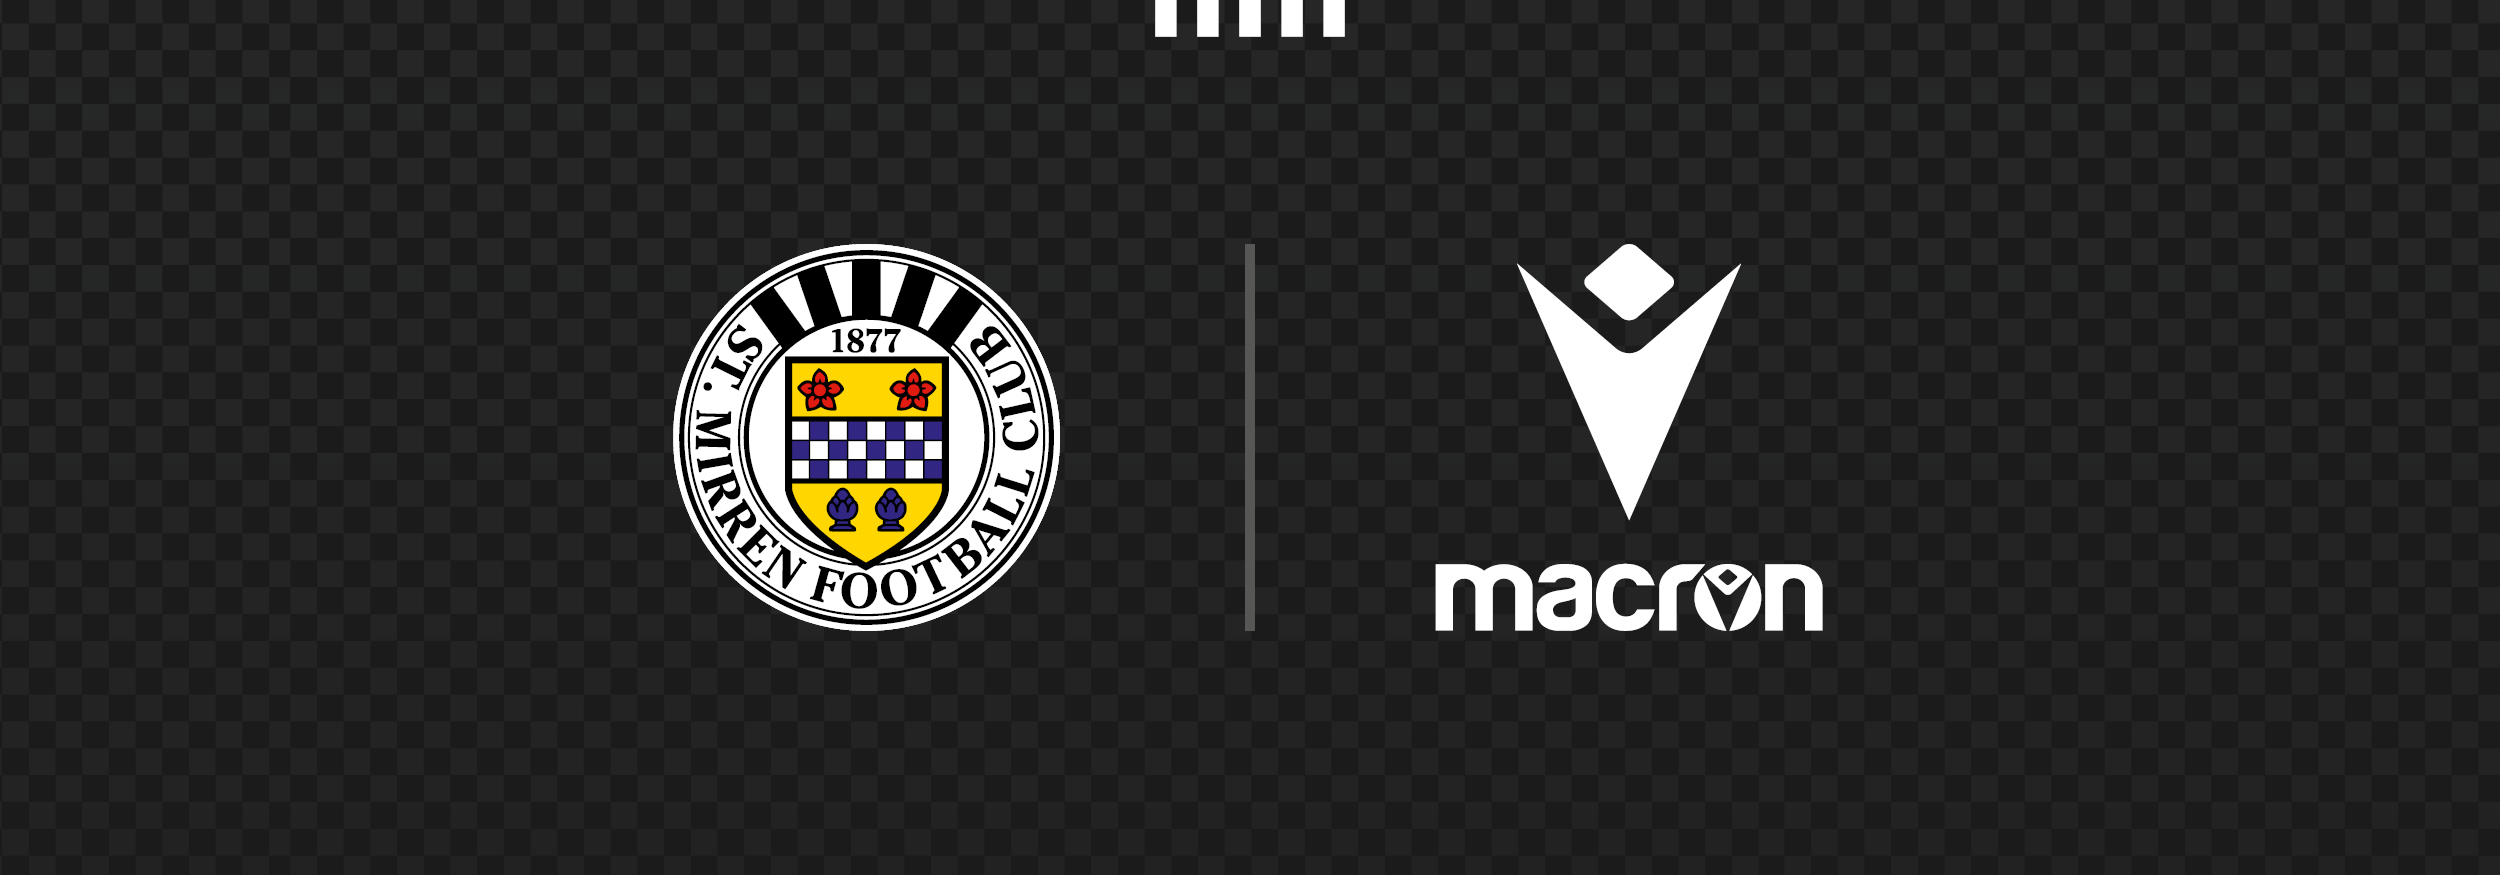 Macron becomes our new Technical Kit Partner